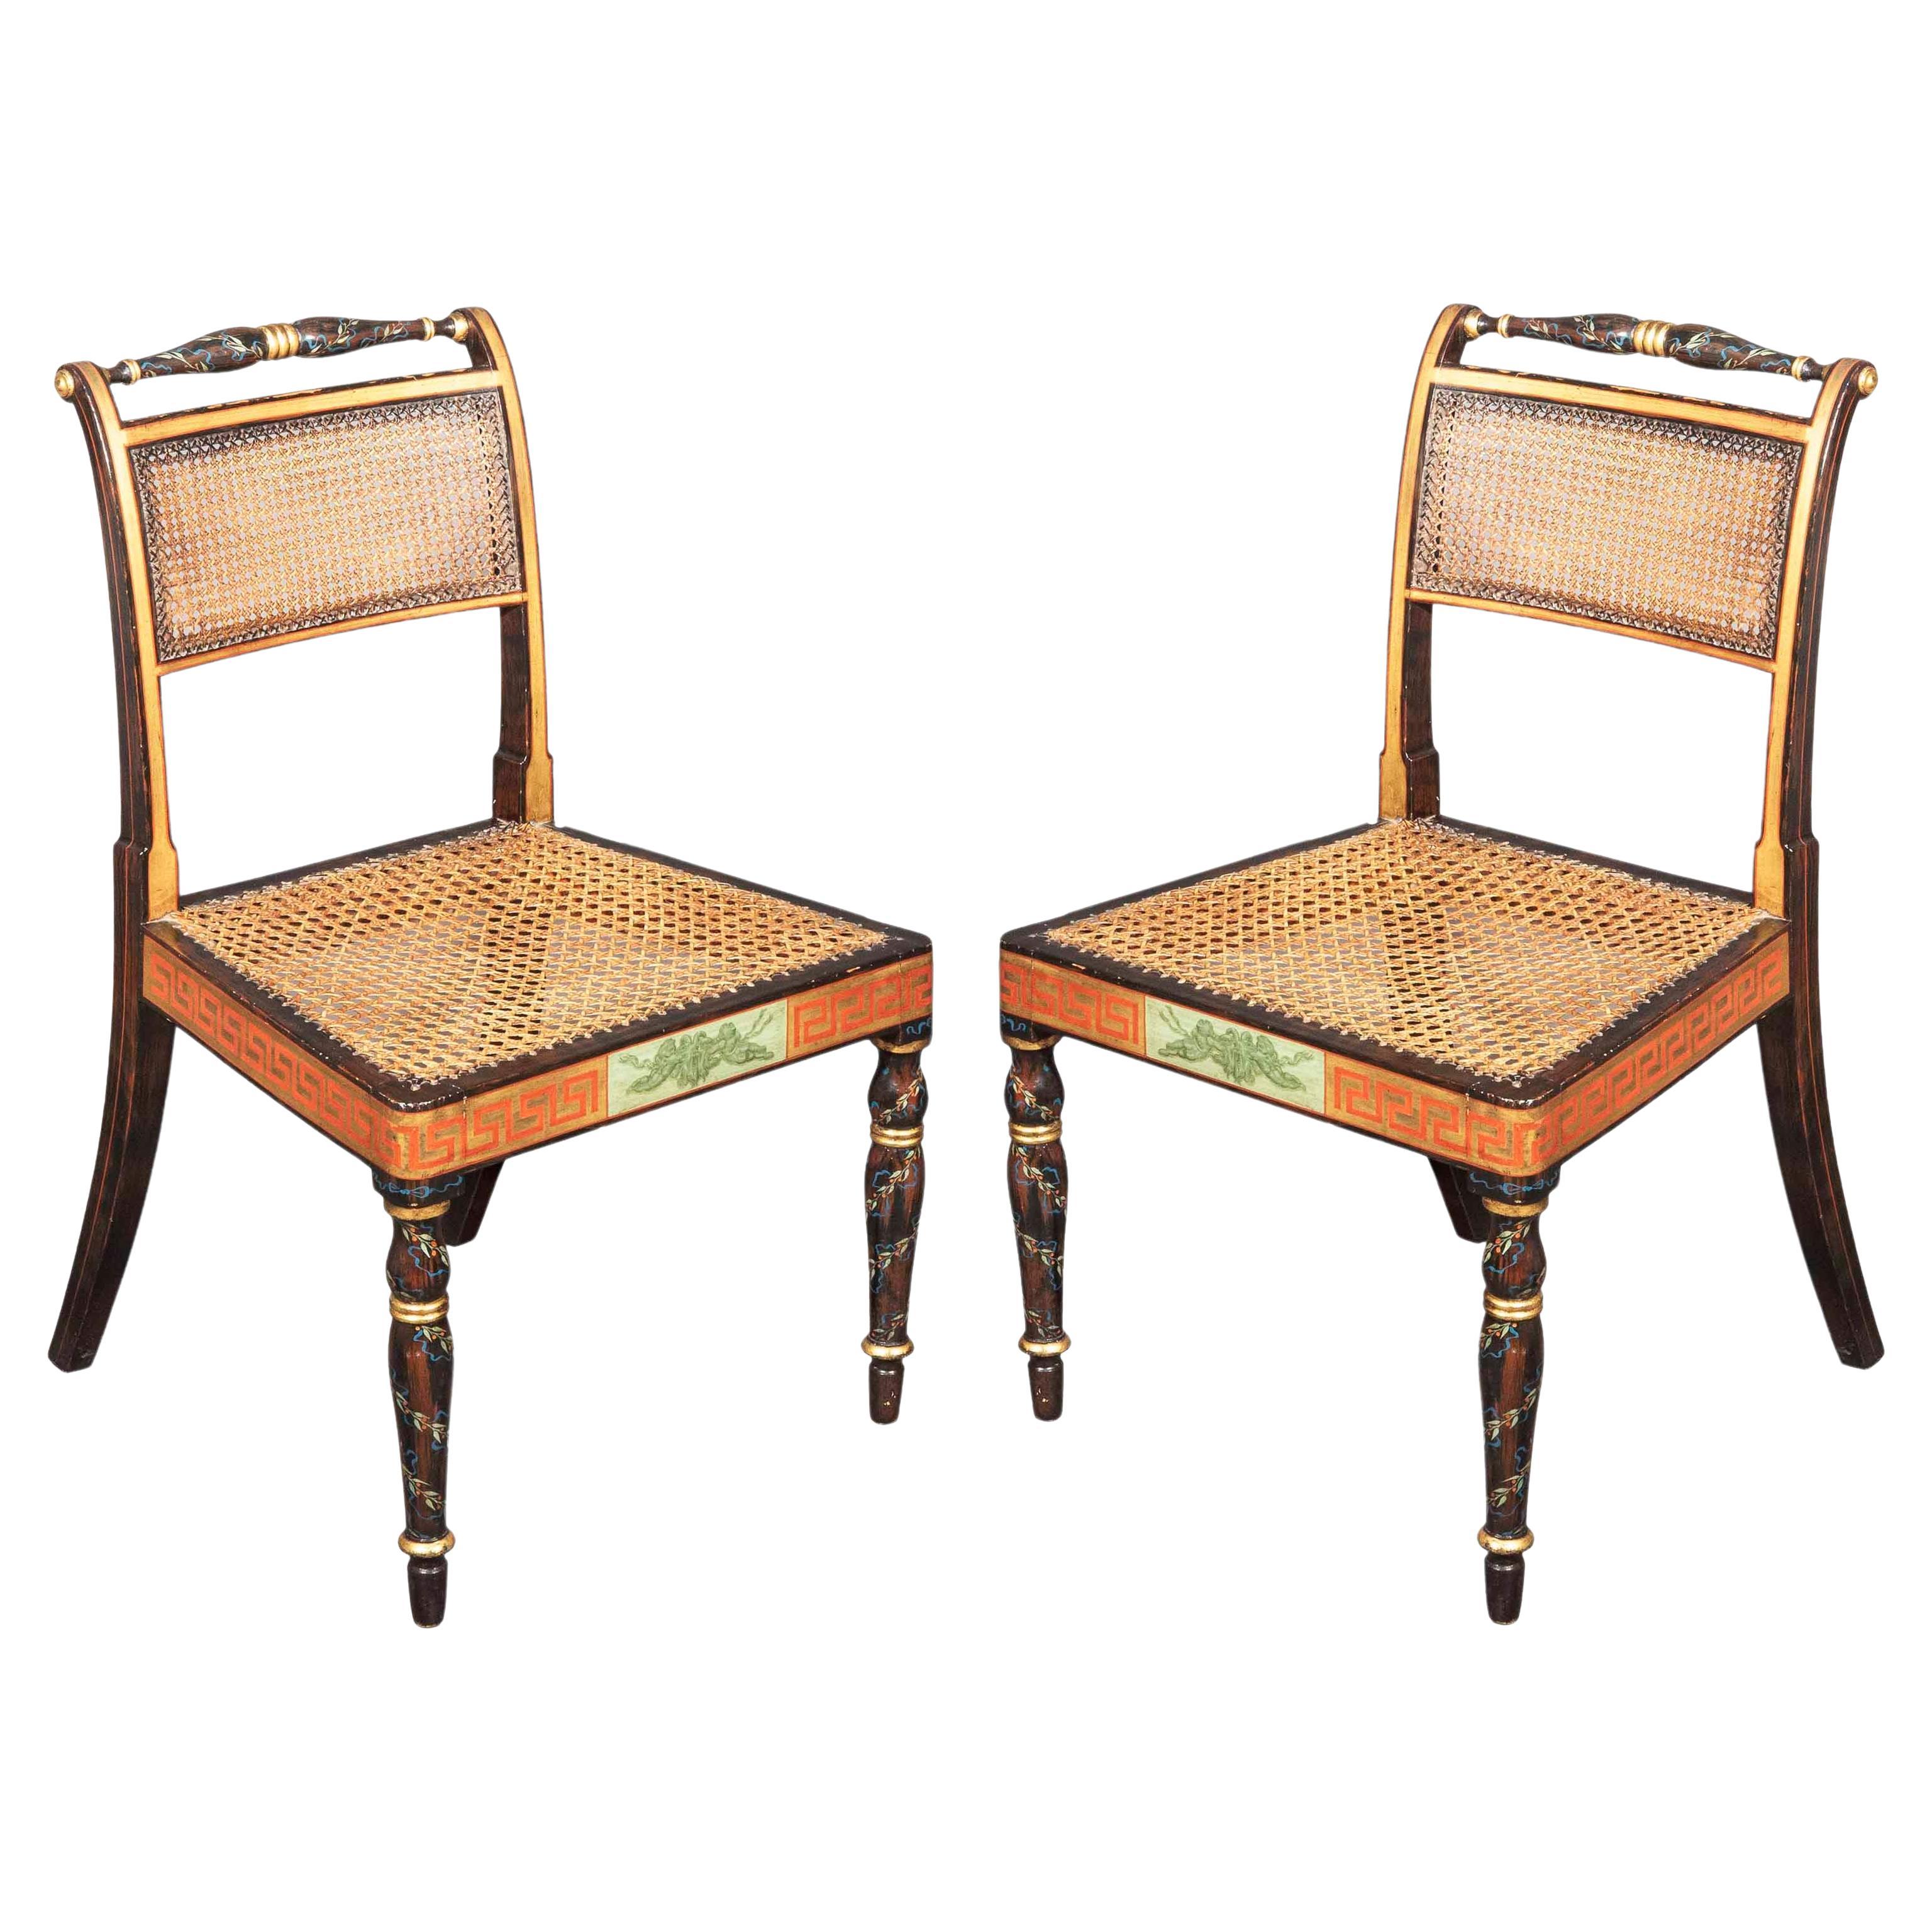 Georgian Regency Painted Chairs, 3 Pairs Available For Sale